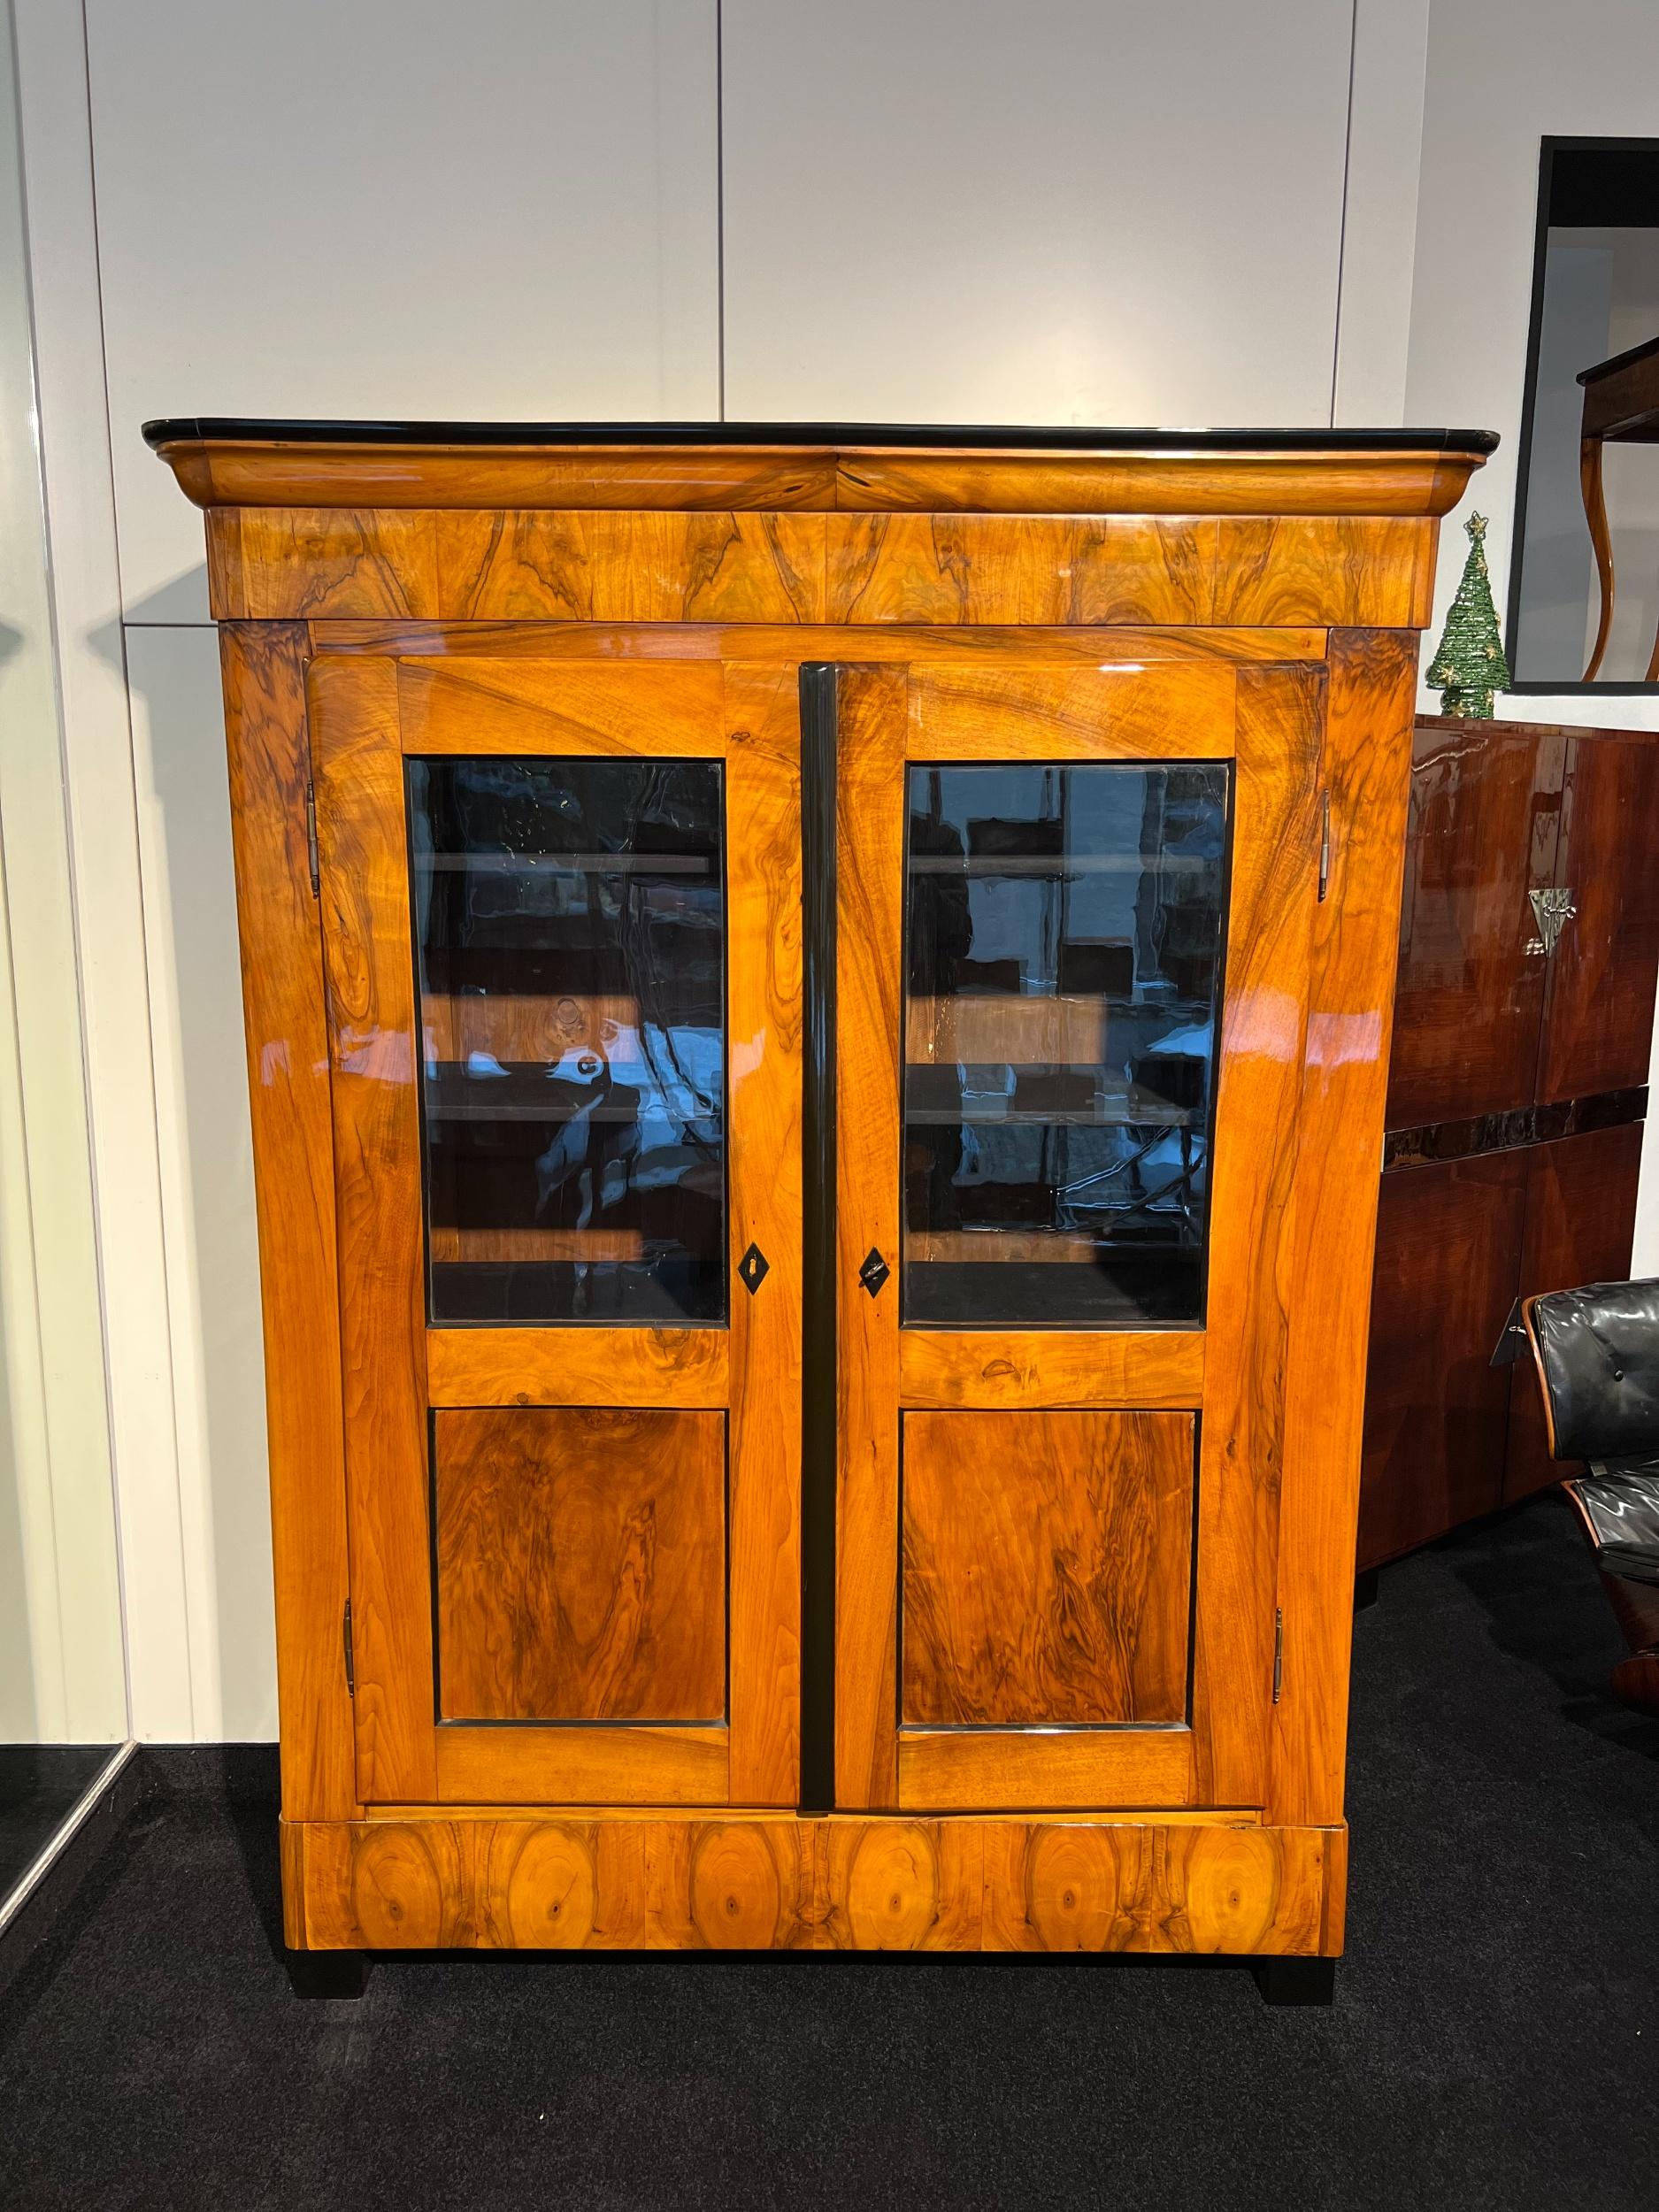 Biedermeier Bookcase, Walnut Veneer, Two-doored, South Germany circa 1830

Walnut veneered and solid with a wonderful veneer grain. 
Original, hand-blown glass windows.
Inside with 4 Inlay Shelves.
Can be completely dismantled for